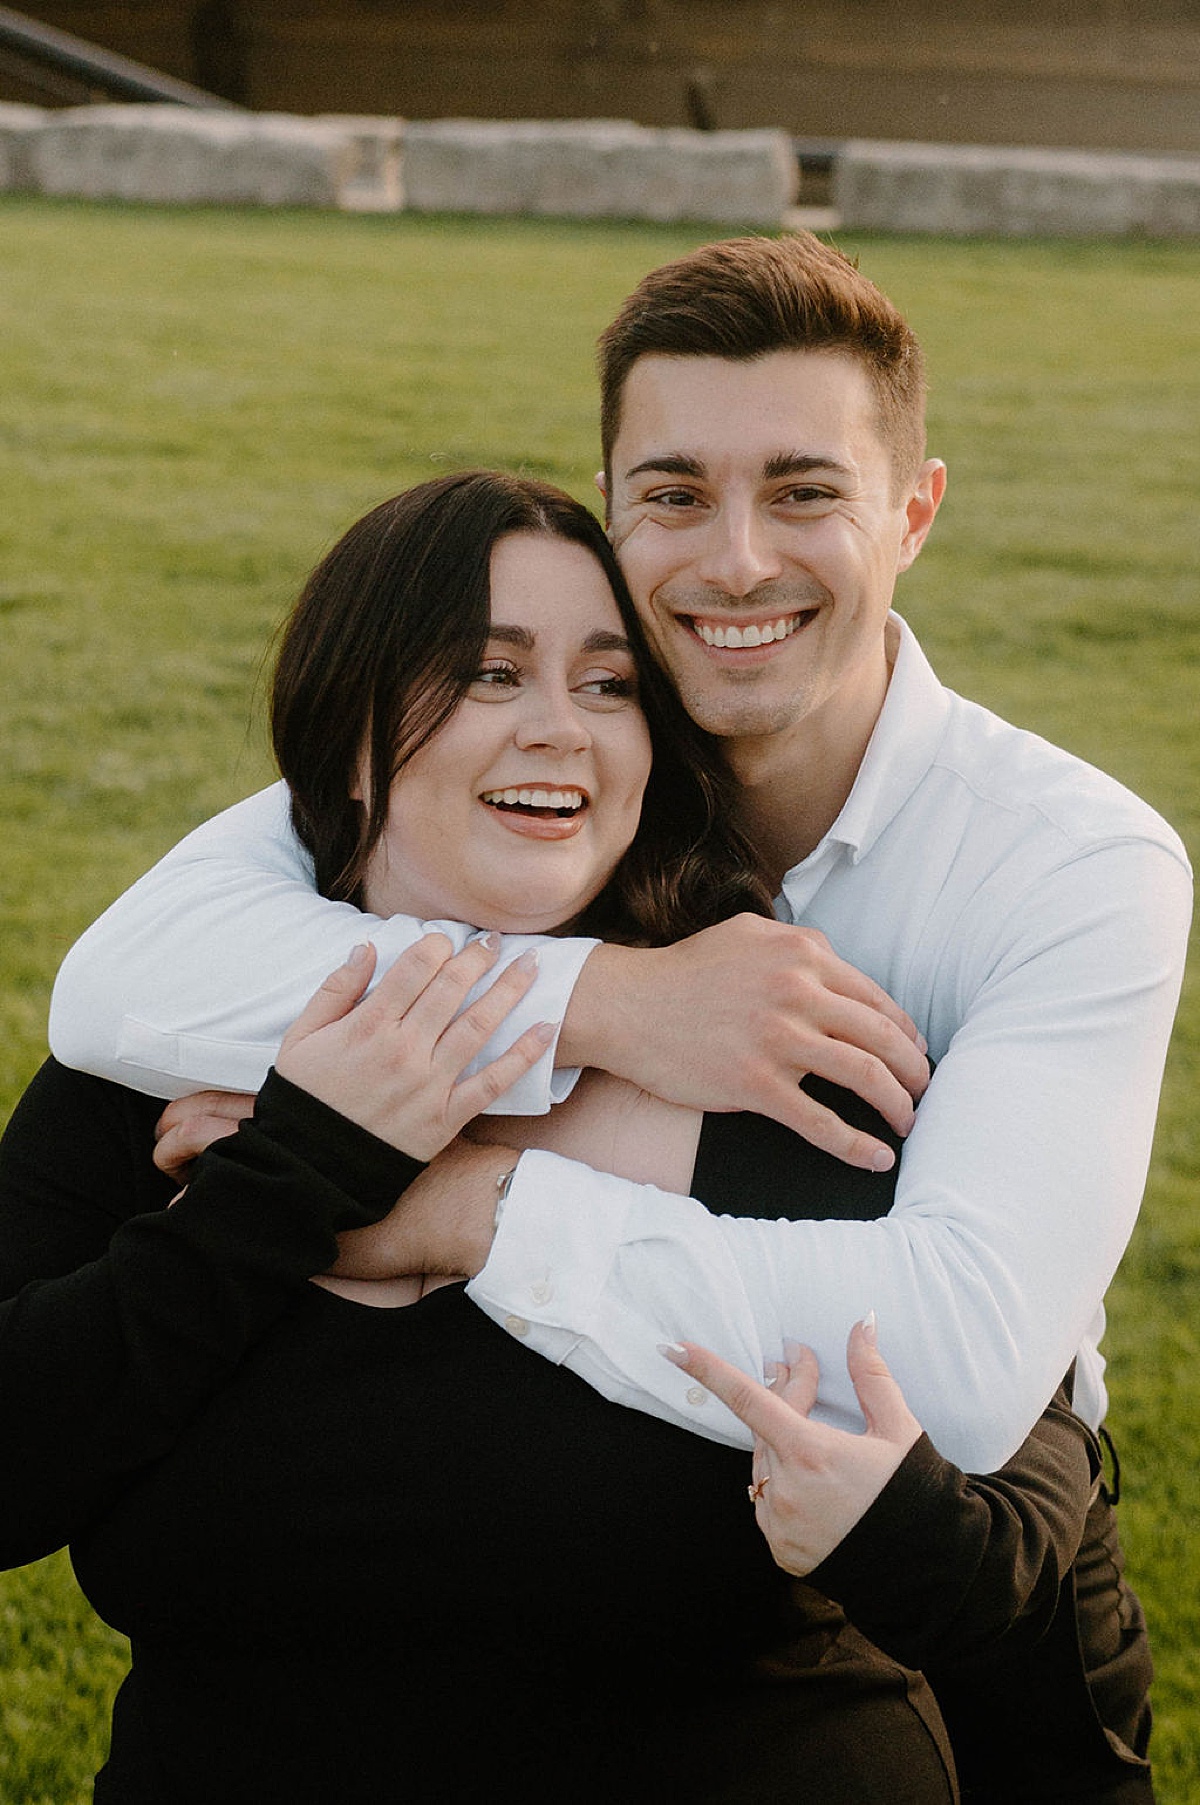 Cute young couple smile during outdoor Indianapolis sunset engagement shoot